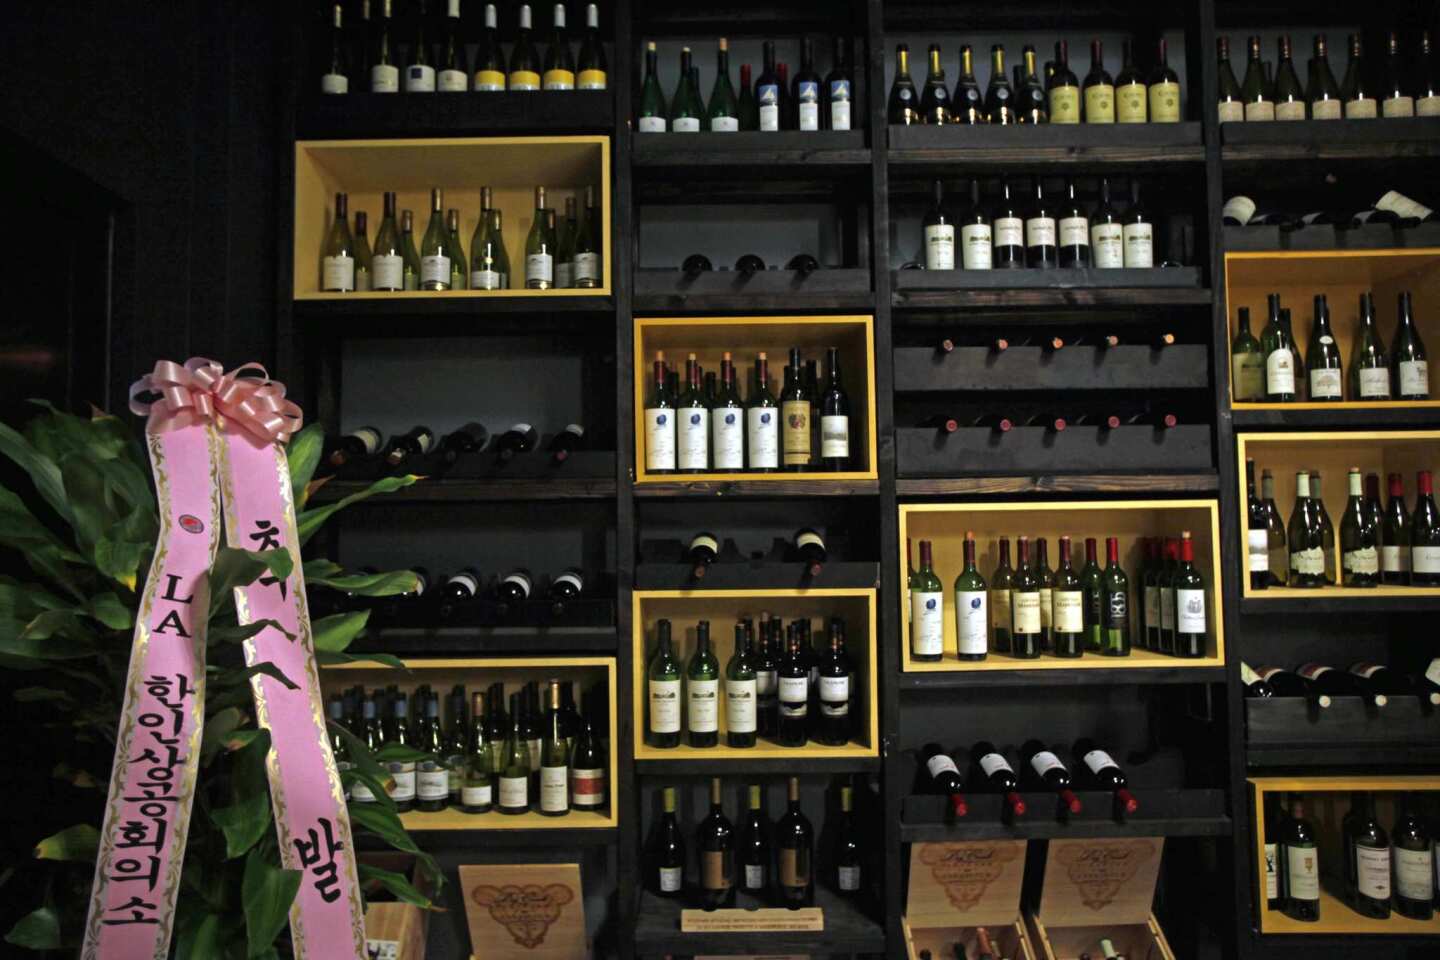 The emphasis is on wine rather than beer at this Koreatown establishment.